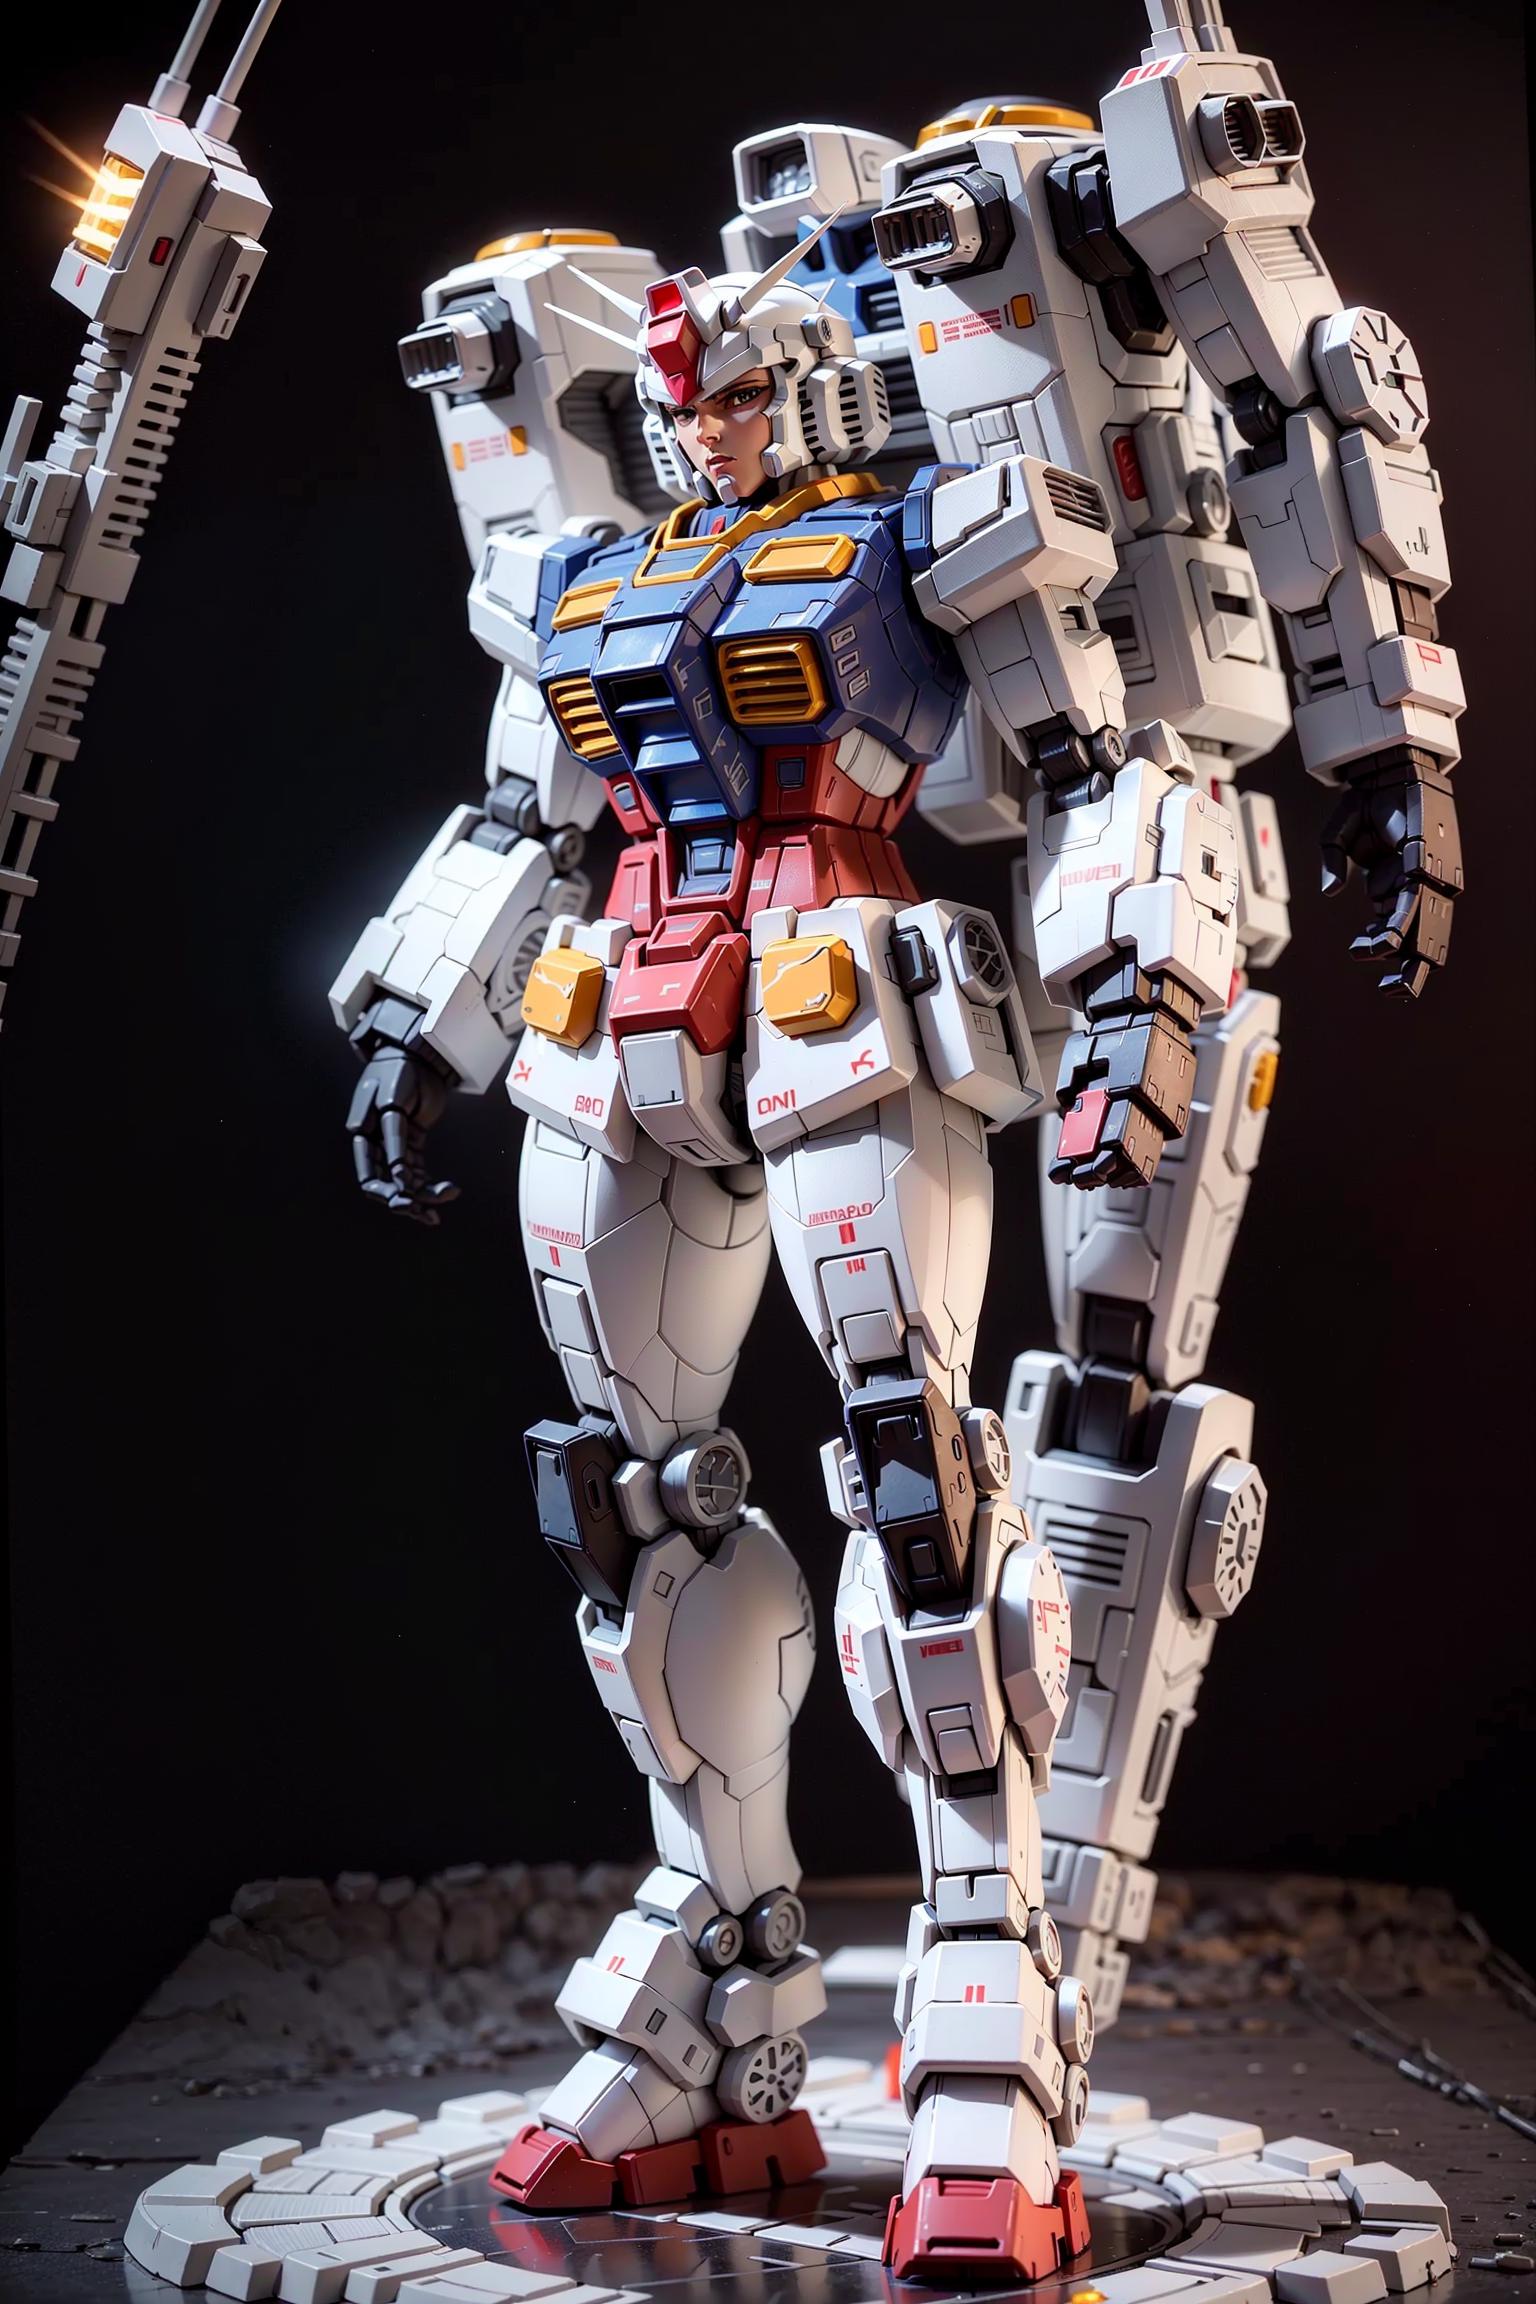 Gundam RX78-2 outfit style 高达RX78-2外观风格 image by ttplanet